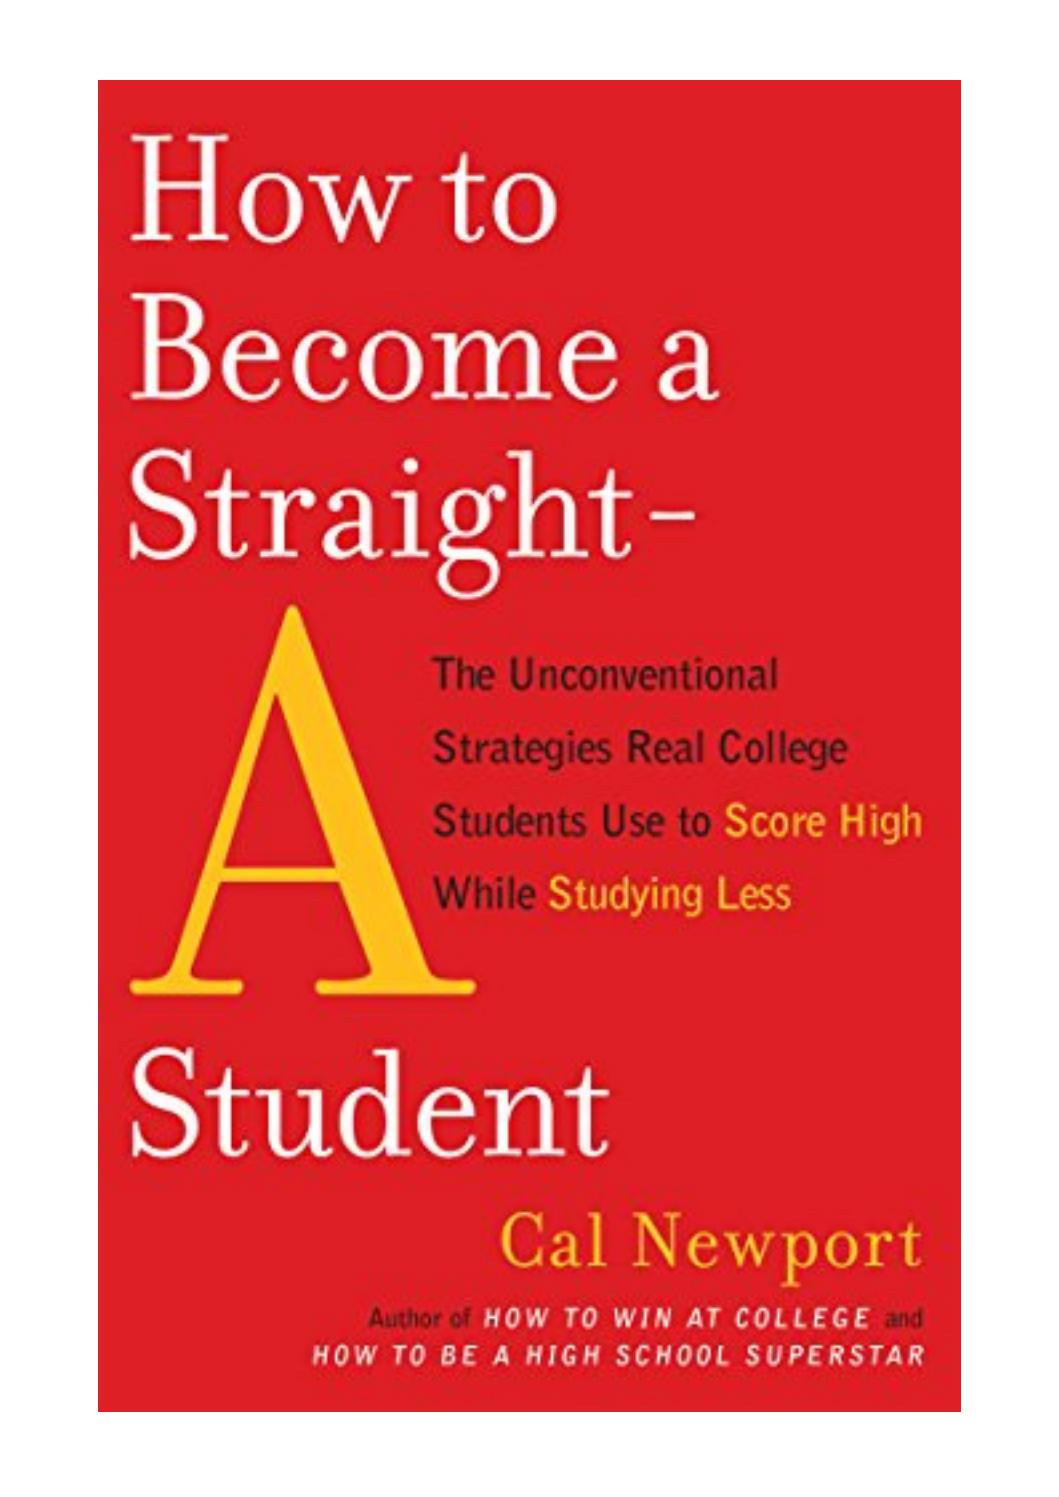 How to Become a Straight-A Student - Cal Newport - The Unconventional  Strategies Real College Stude by H7T PDF 55 - issuu